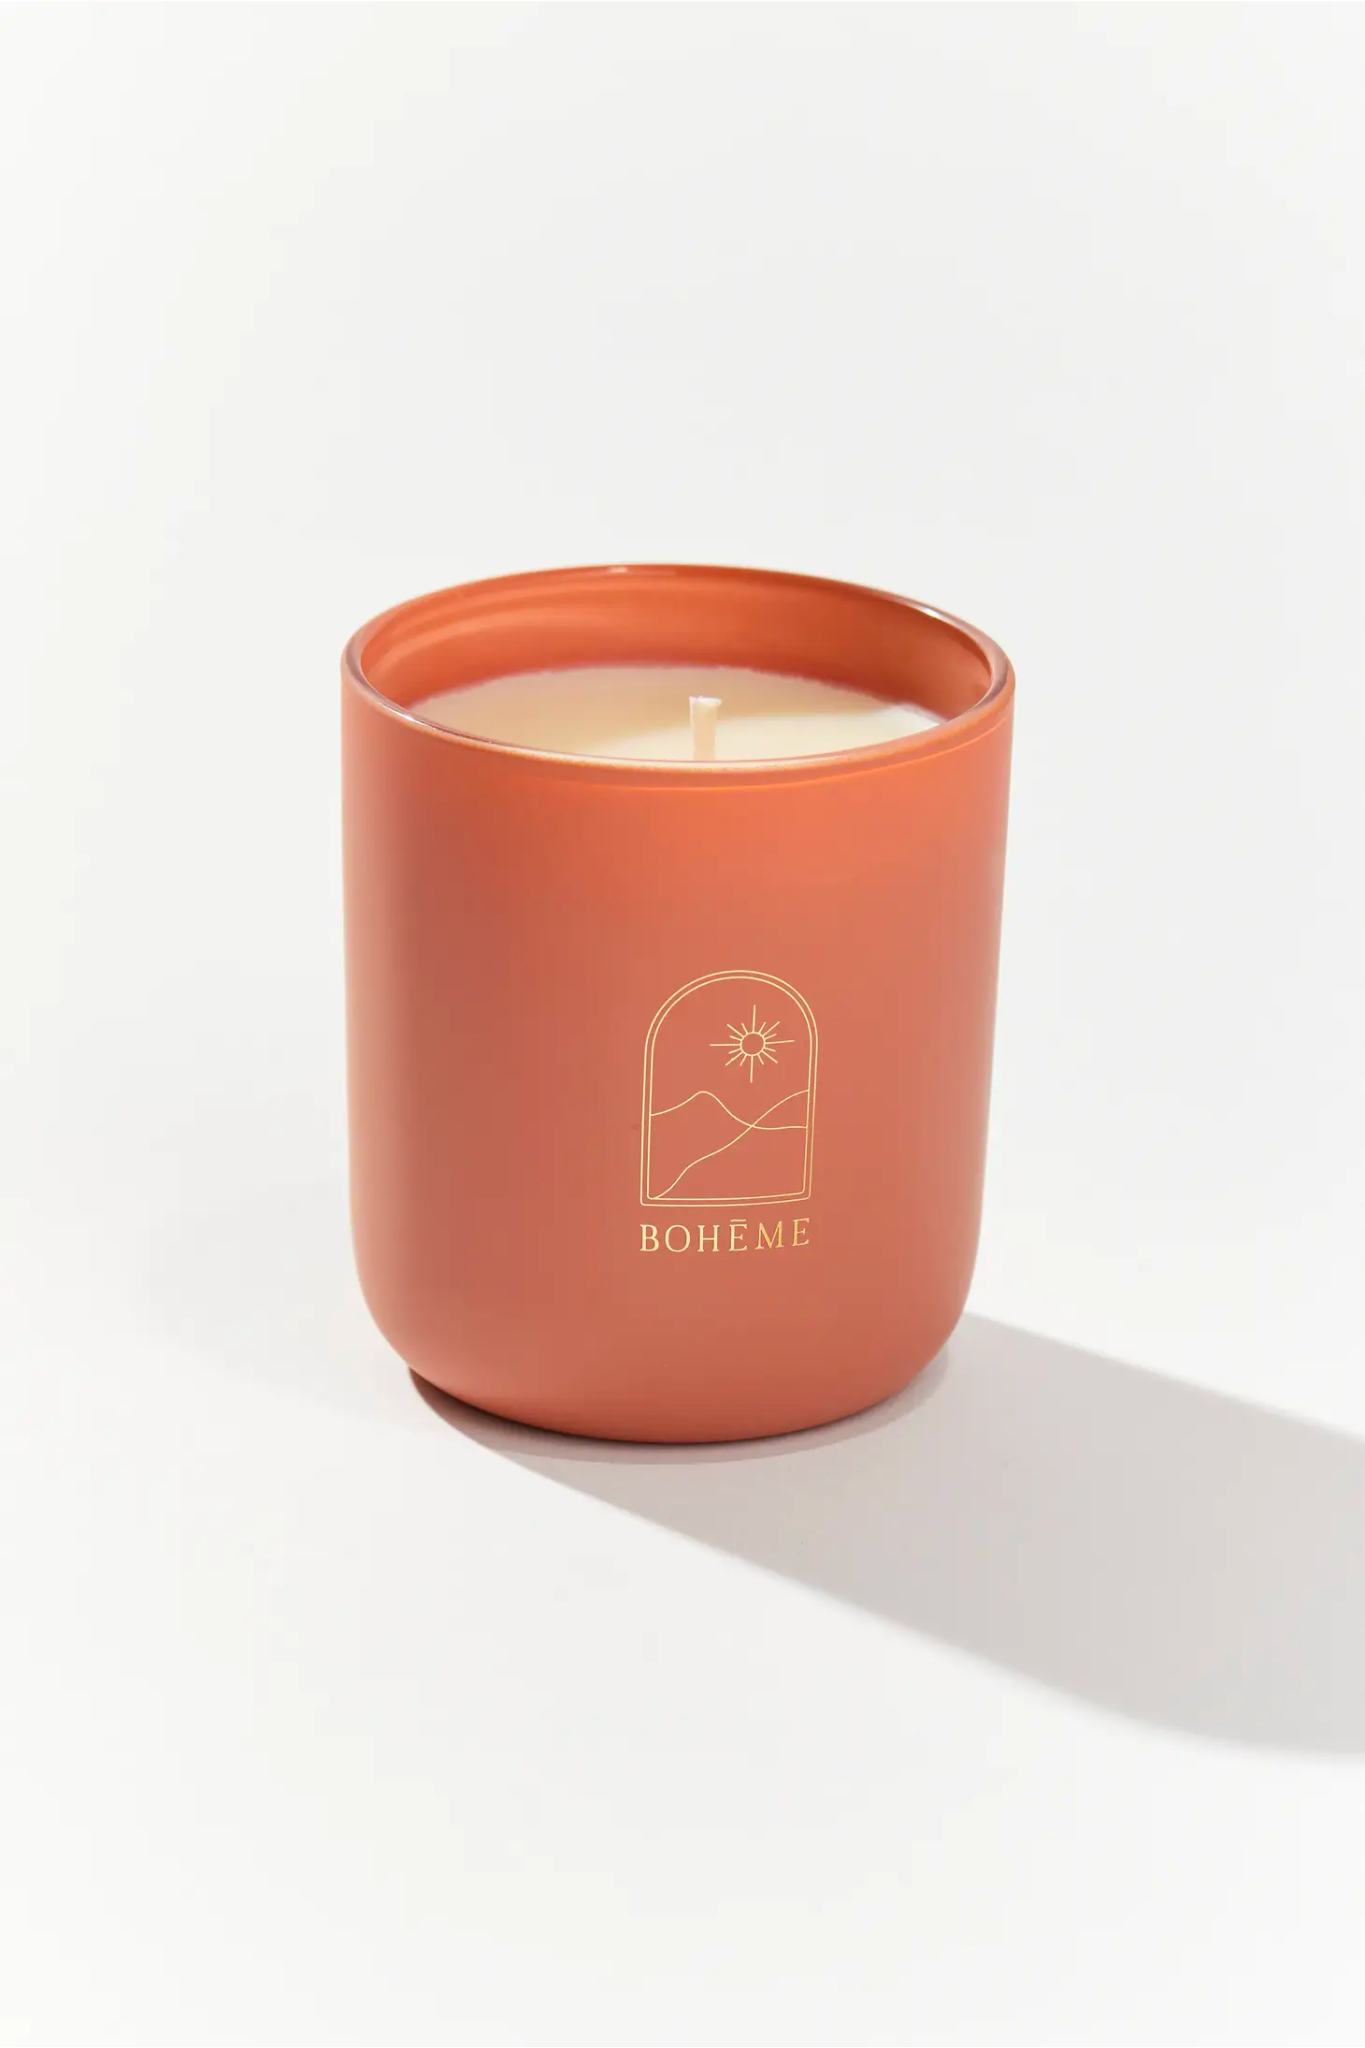 View 2 of Boheme Seville Candle, a Candles from Larrea Cove. Detail: .